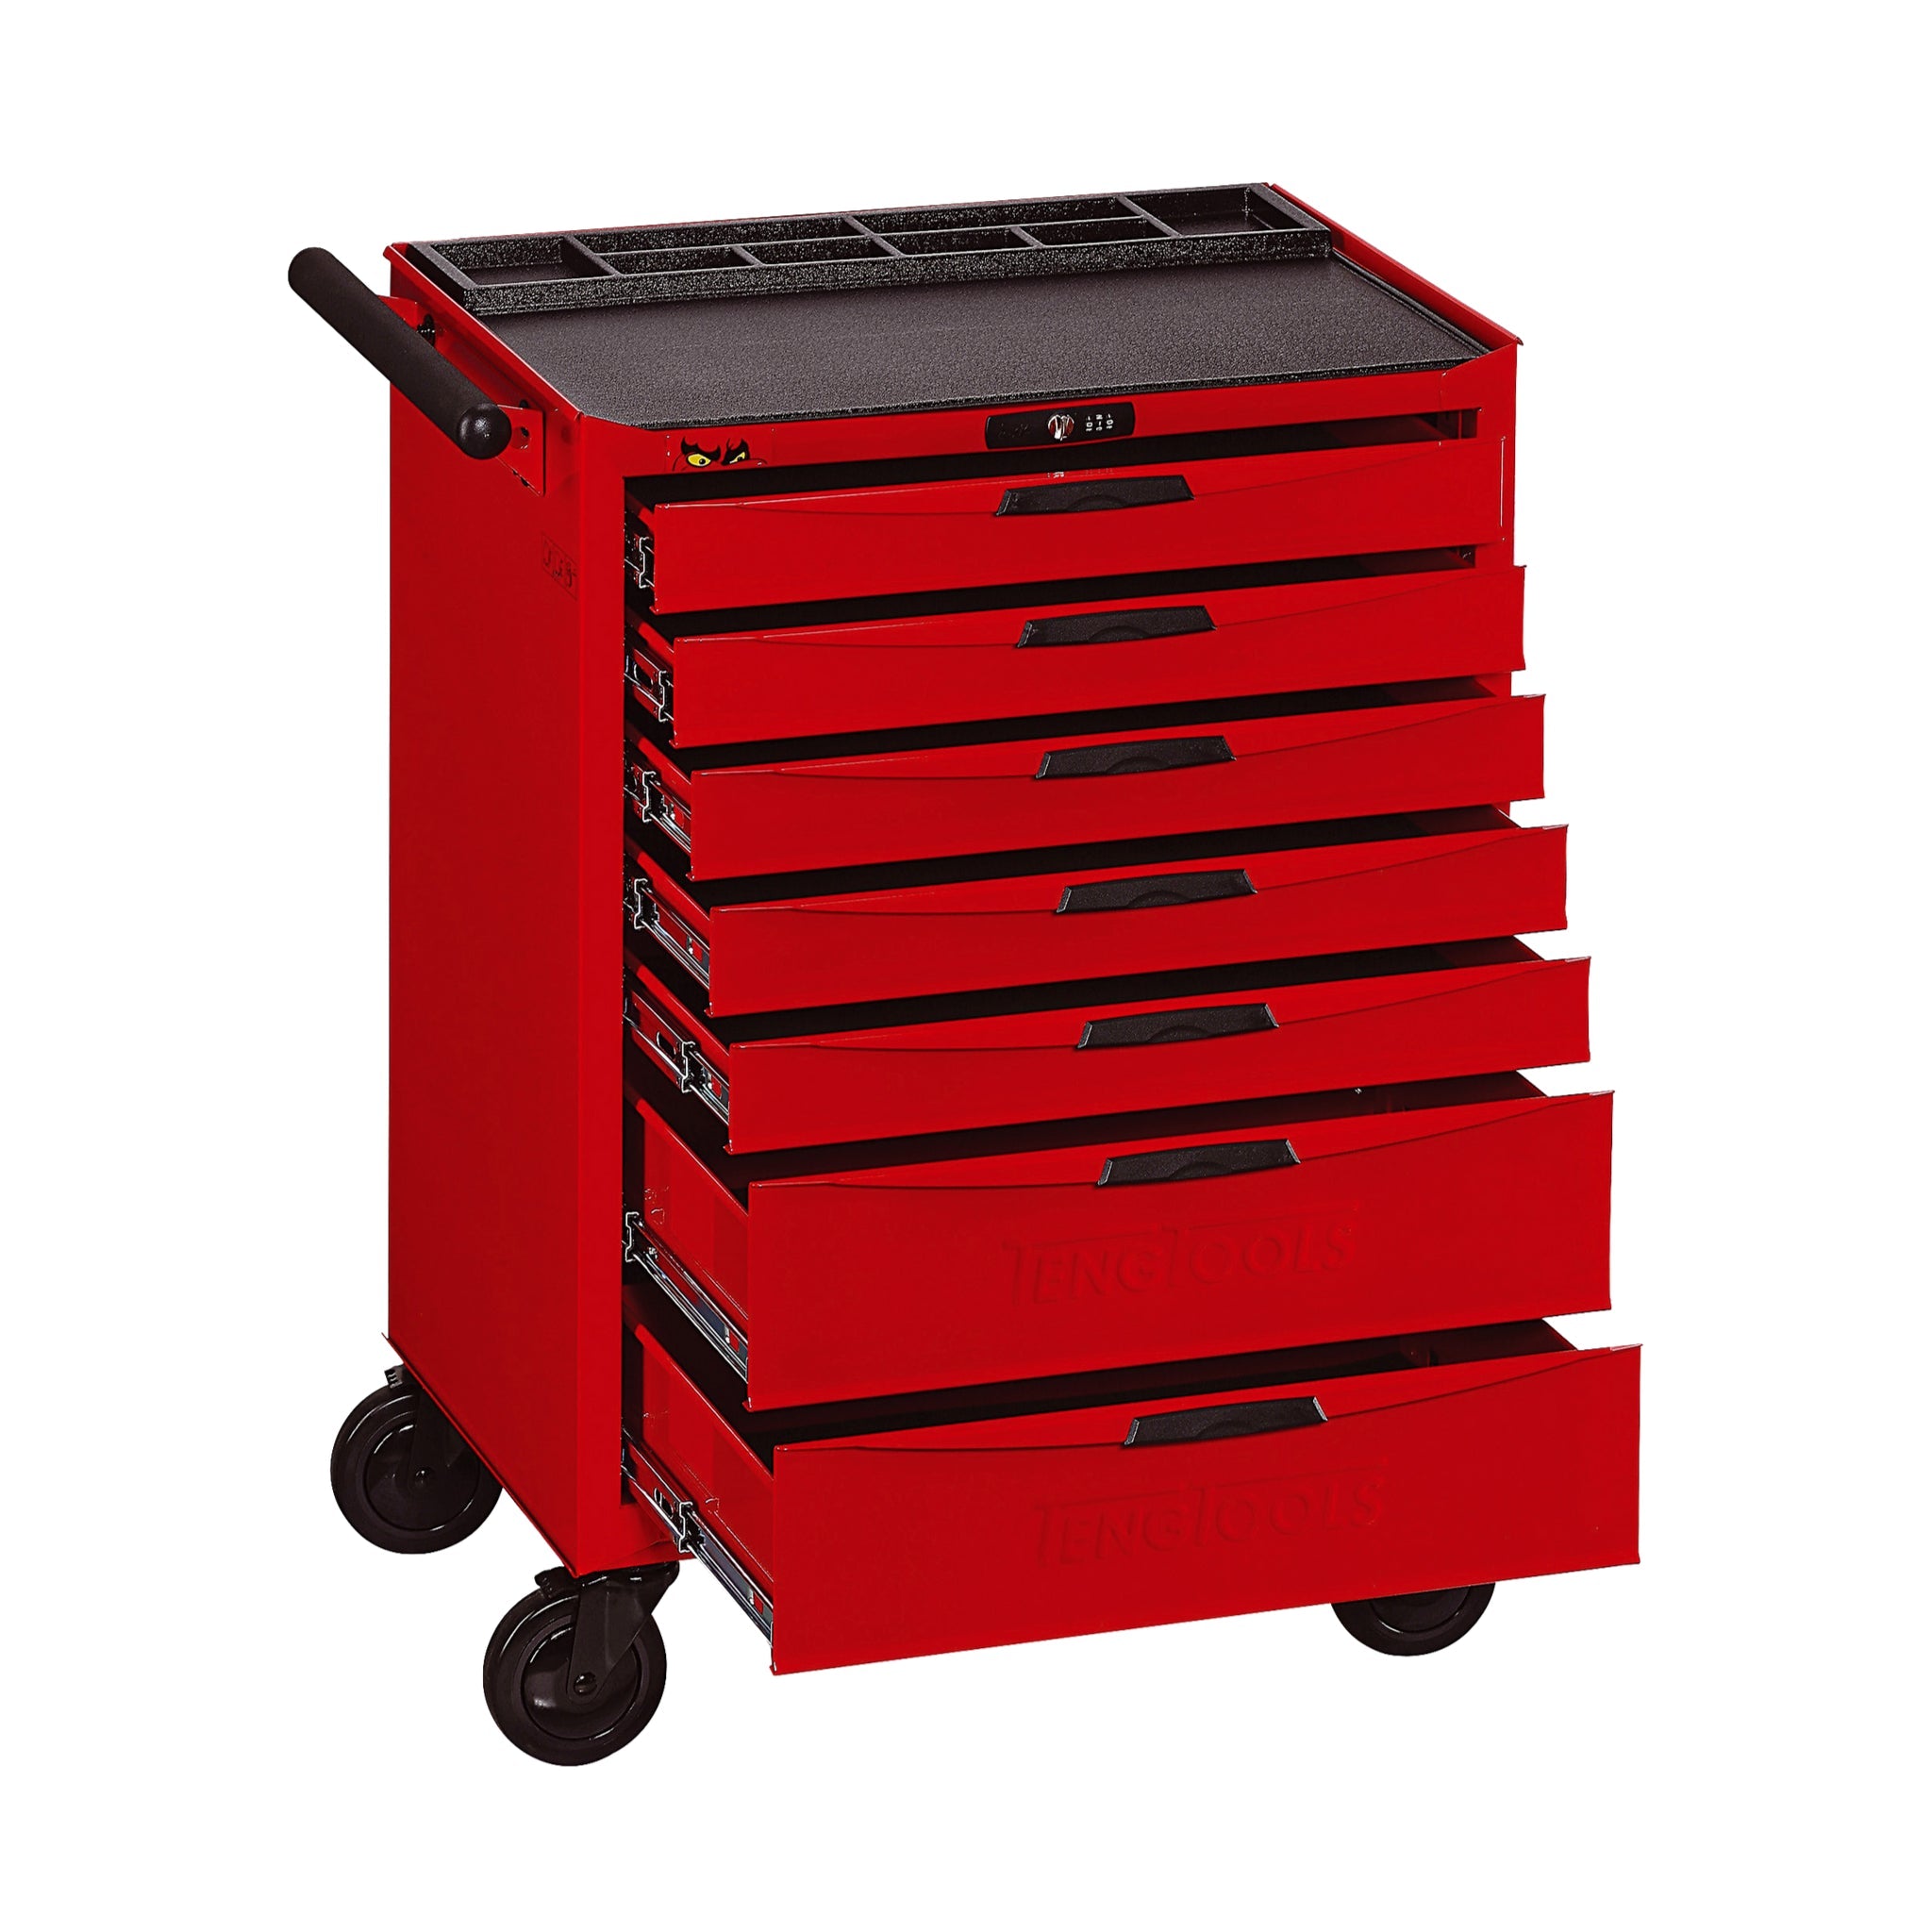 Teng Tools 7 Drawer Heavy Duty Roller Cabinet Tool Chest / Wagon - TCW807N